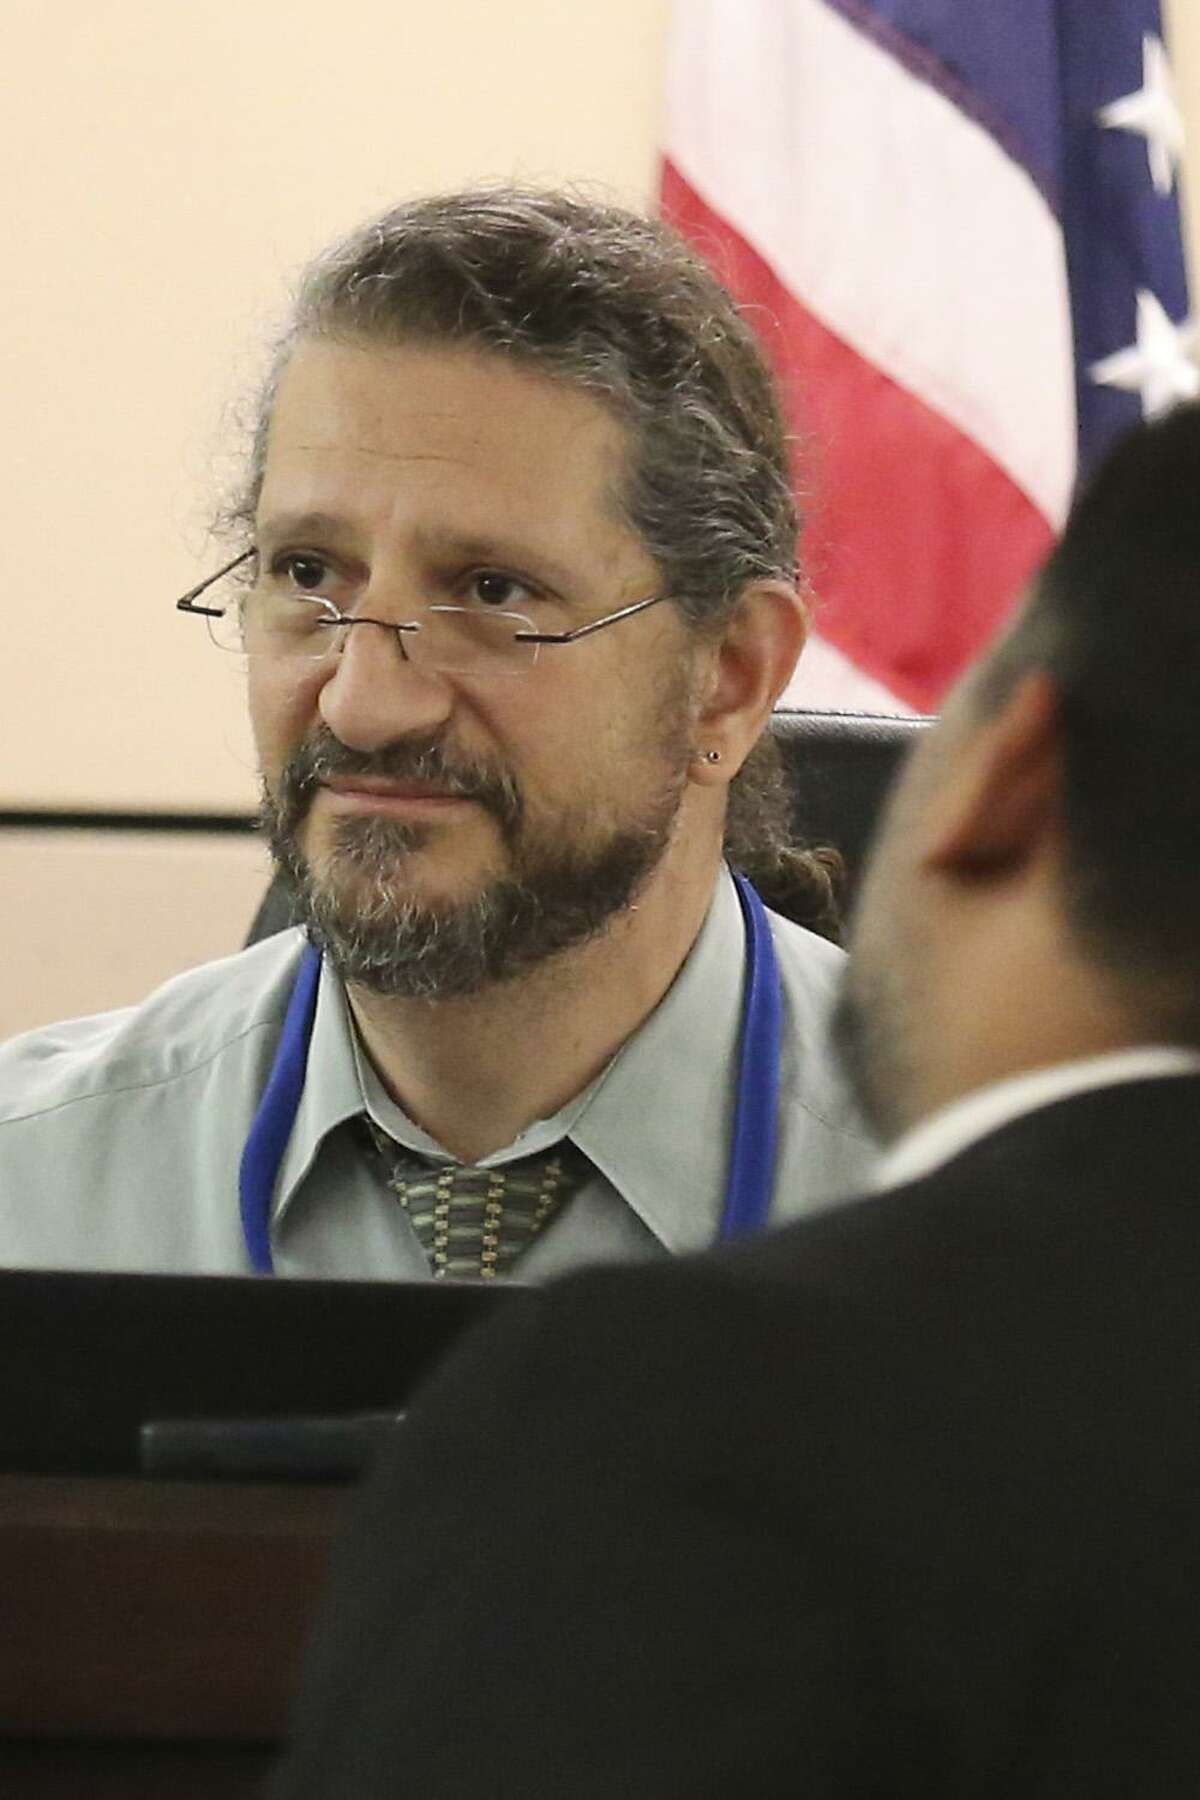 Isaac Andrew Cardenas, is sentenced to two concurrent life sentences without parole by Visiting Judge Philip Kazen (pictured) in 437th State District Court on Friday, Oct. 26, 2018 after a jury had found Cardenas guilty earlier this month on four counts of super aggravated sexual assault of a 21-month old girl. (Kin Man Hui/San Antonio Express-News)